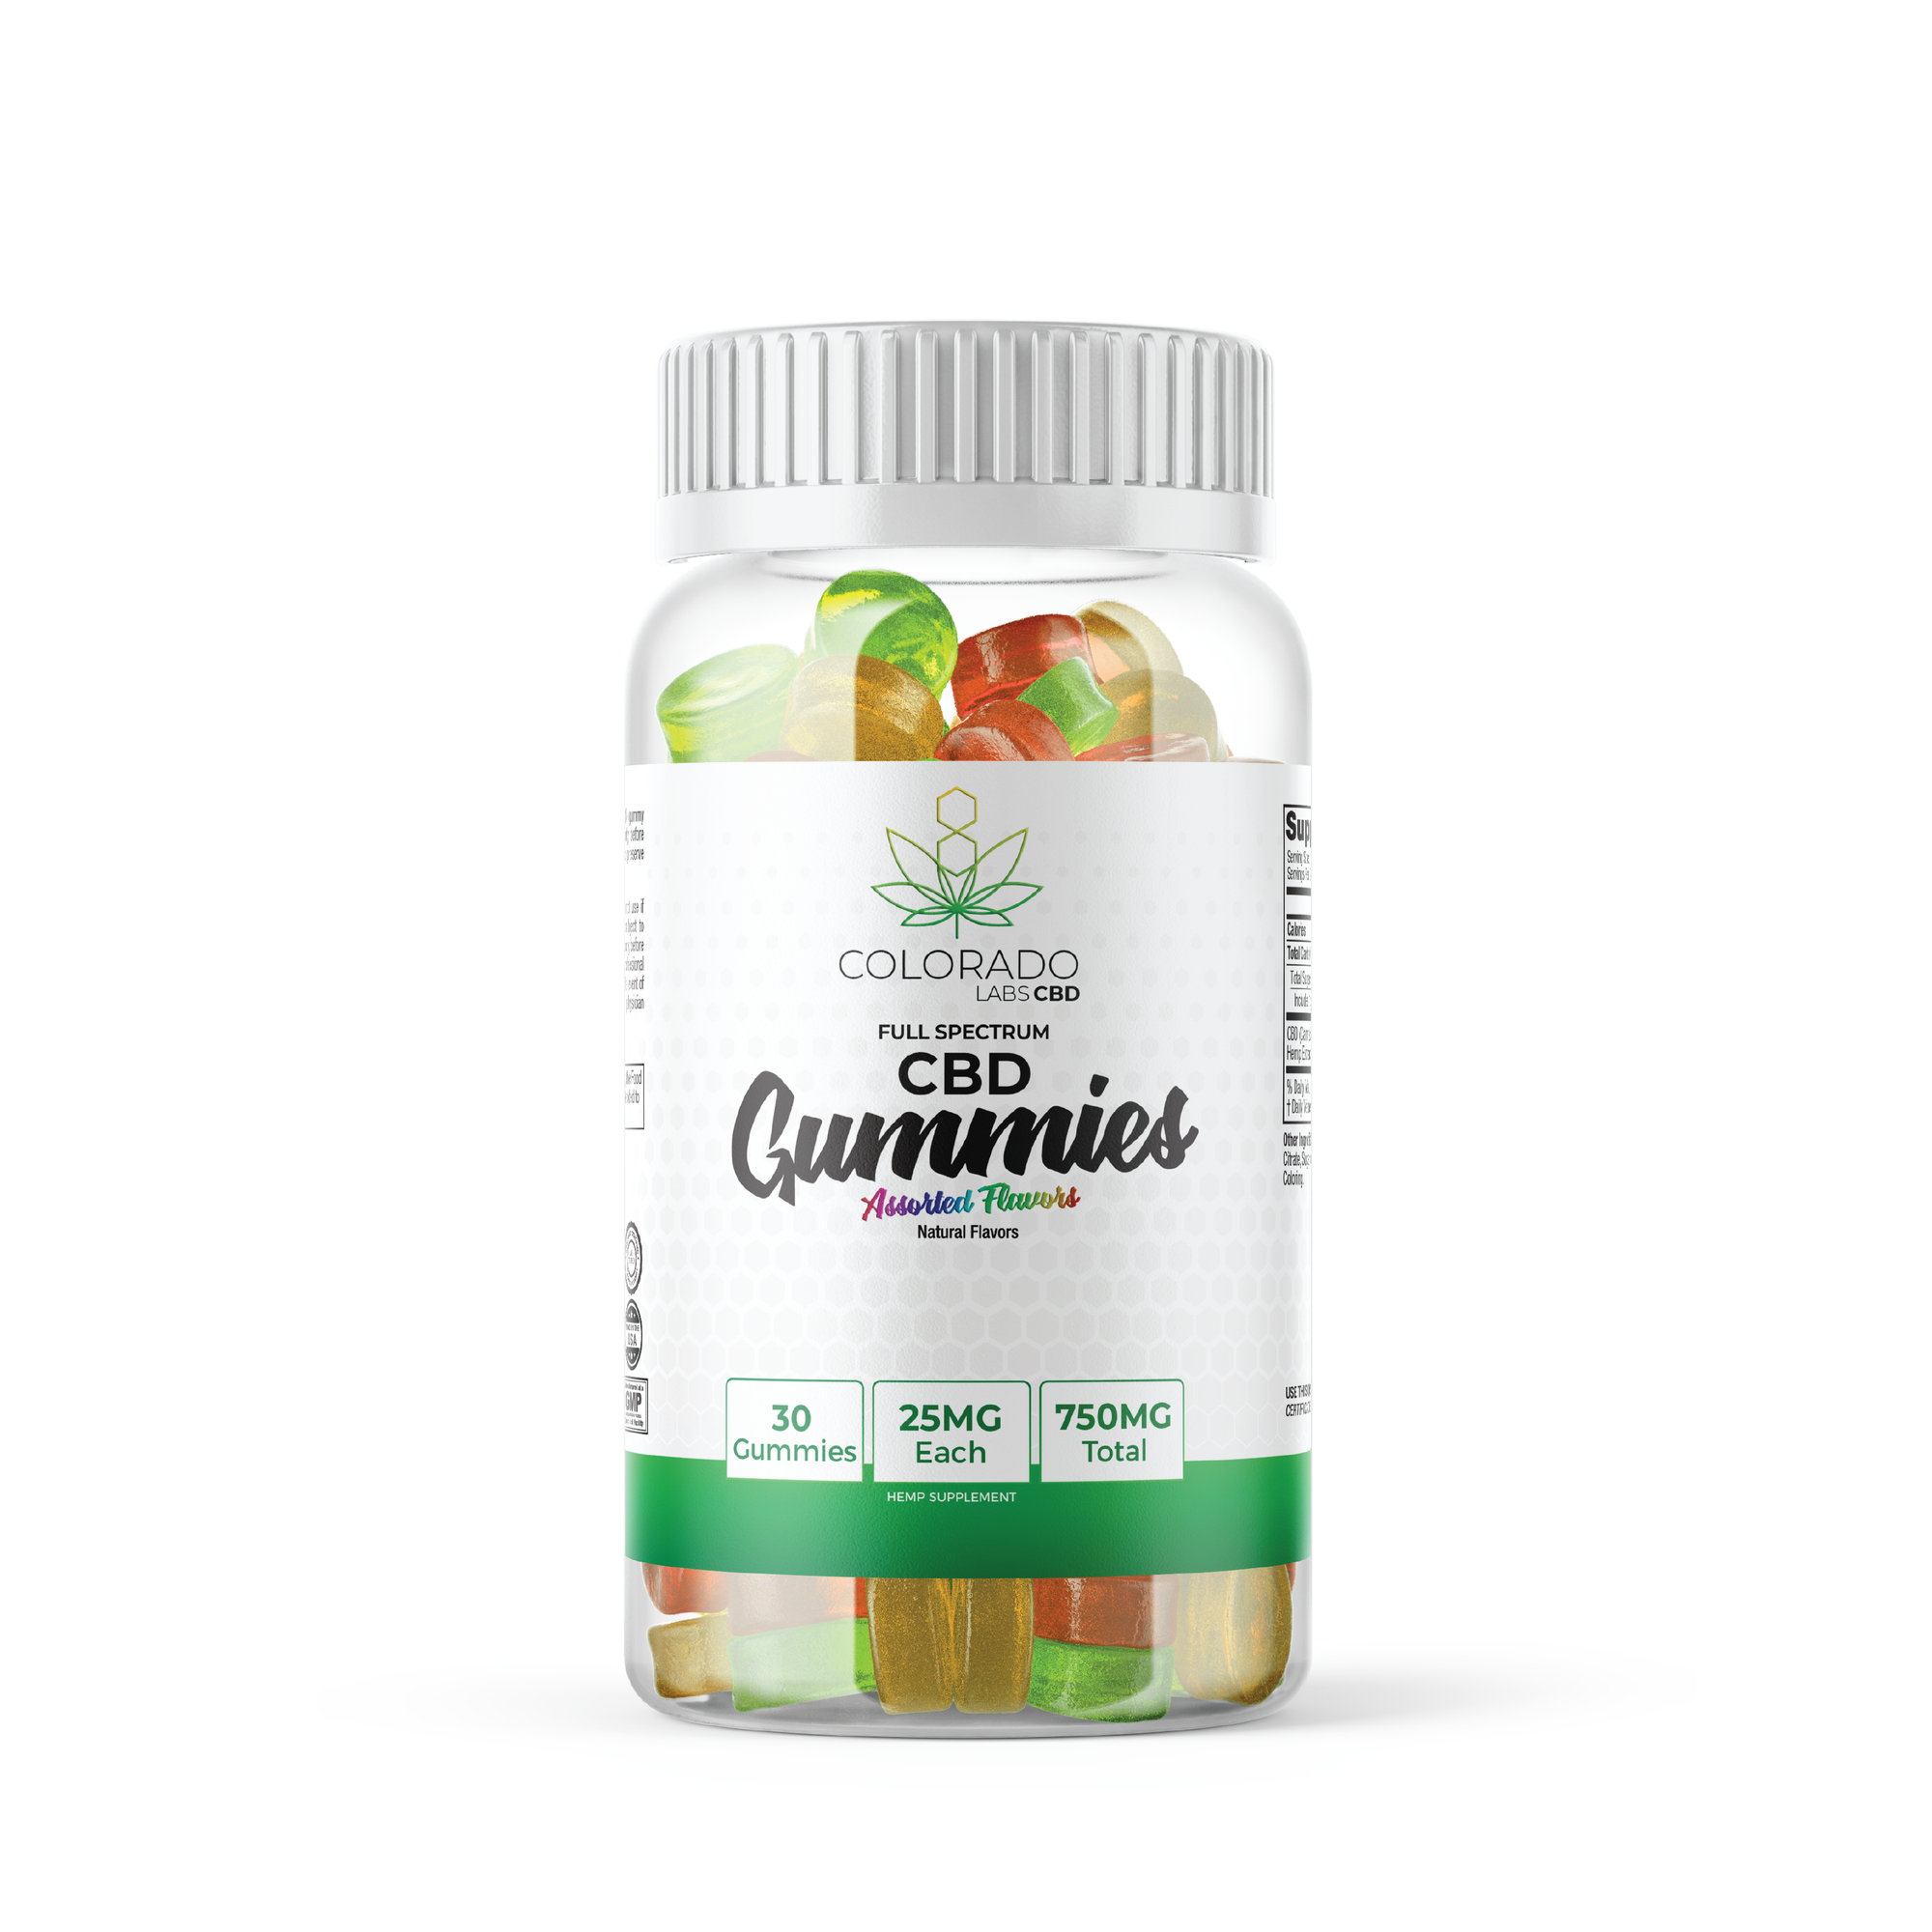 Colorado Labs Full Spectrum Gummies 750mg 30ct Assorted Flavors Axis Labs CBD - 